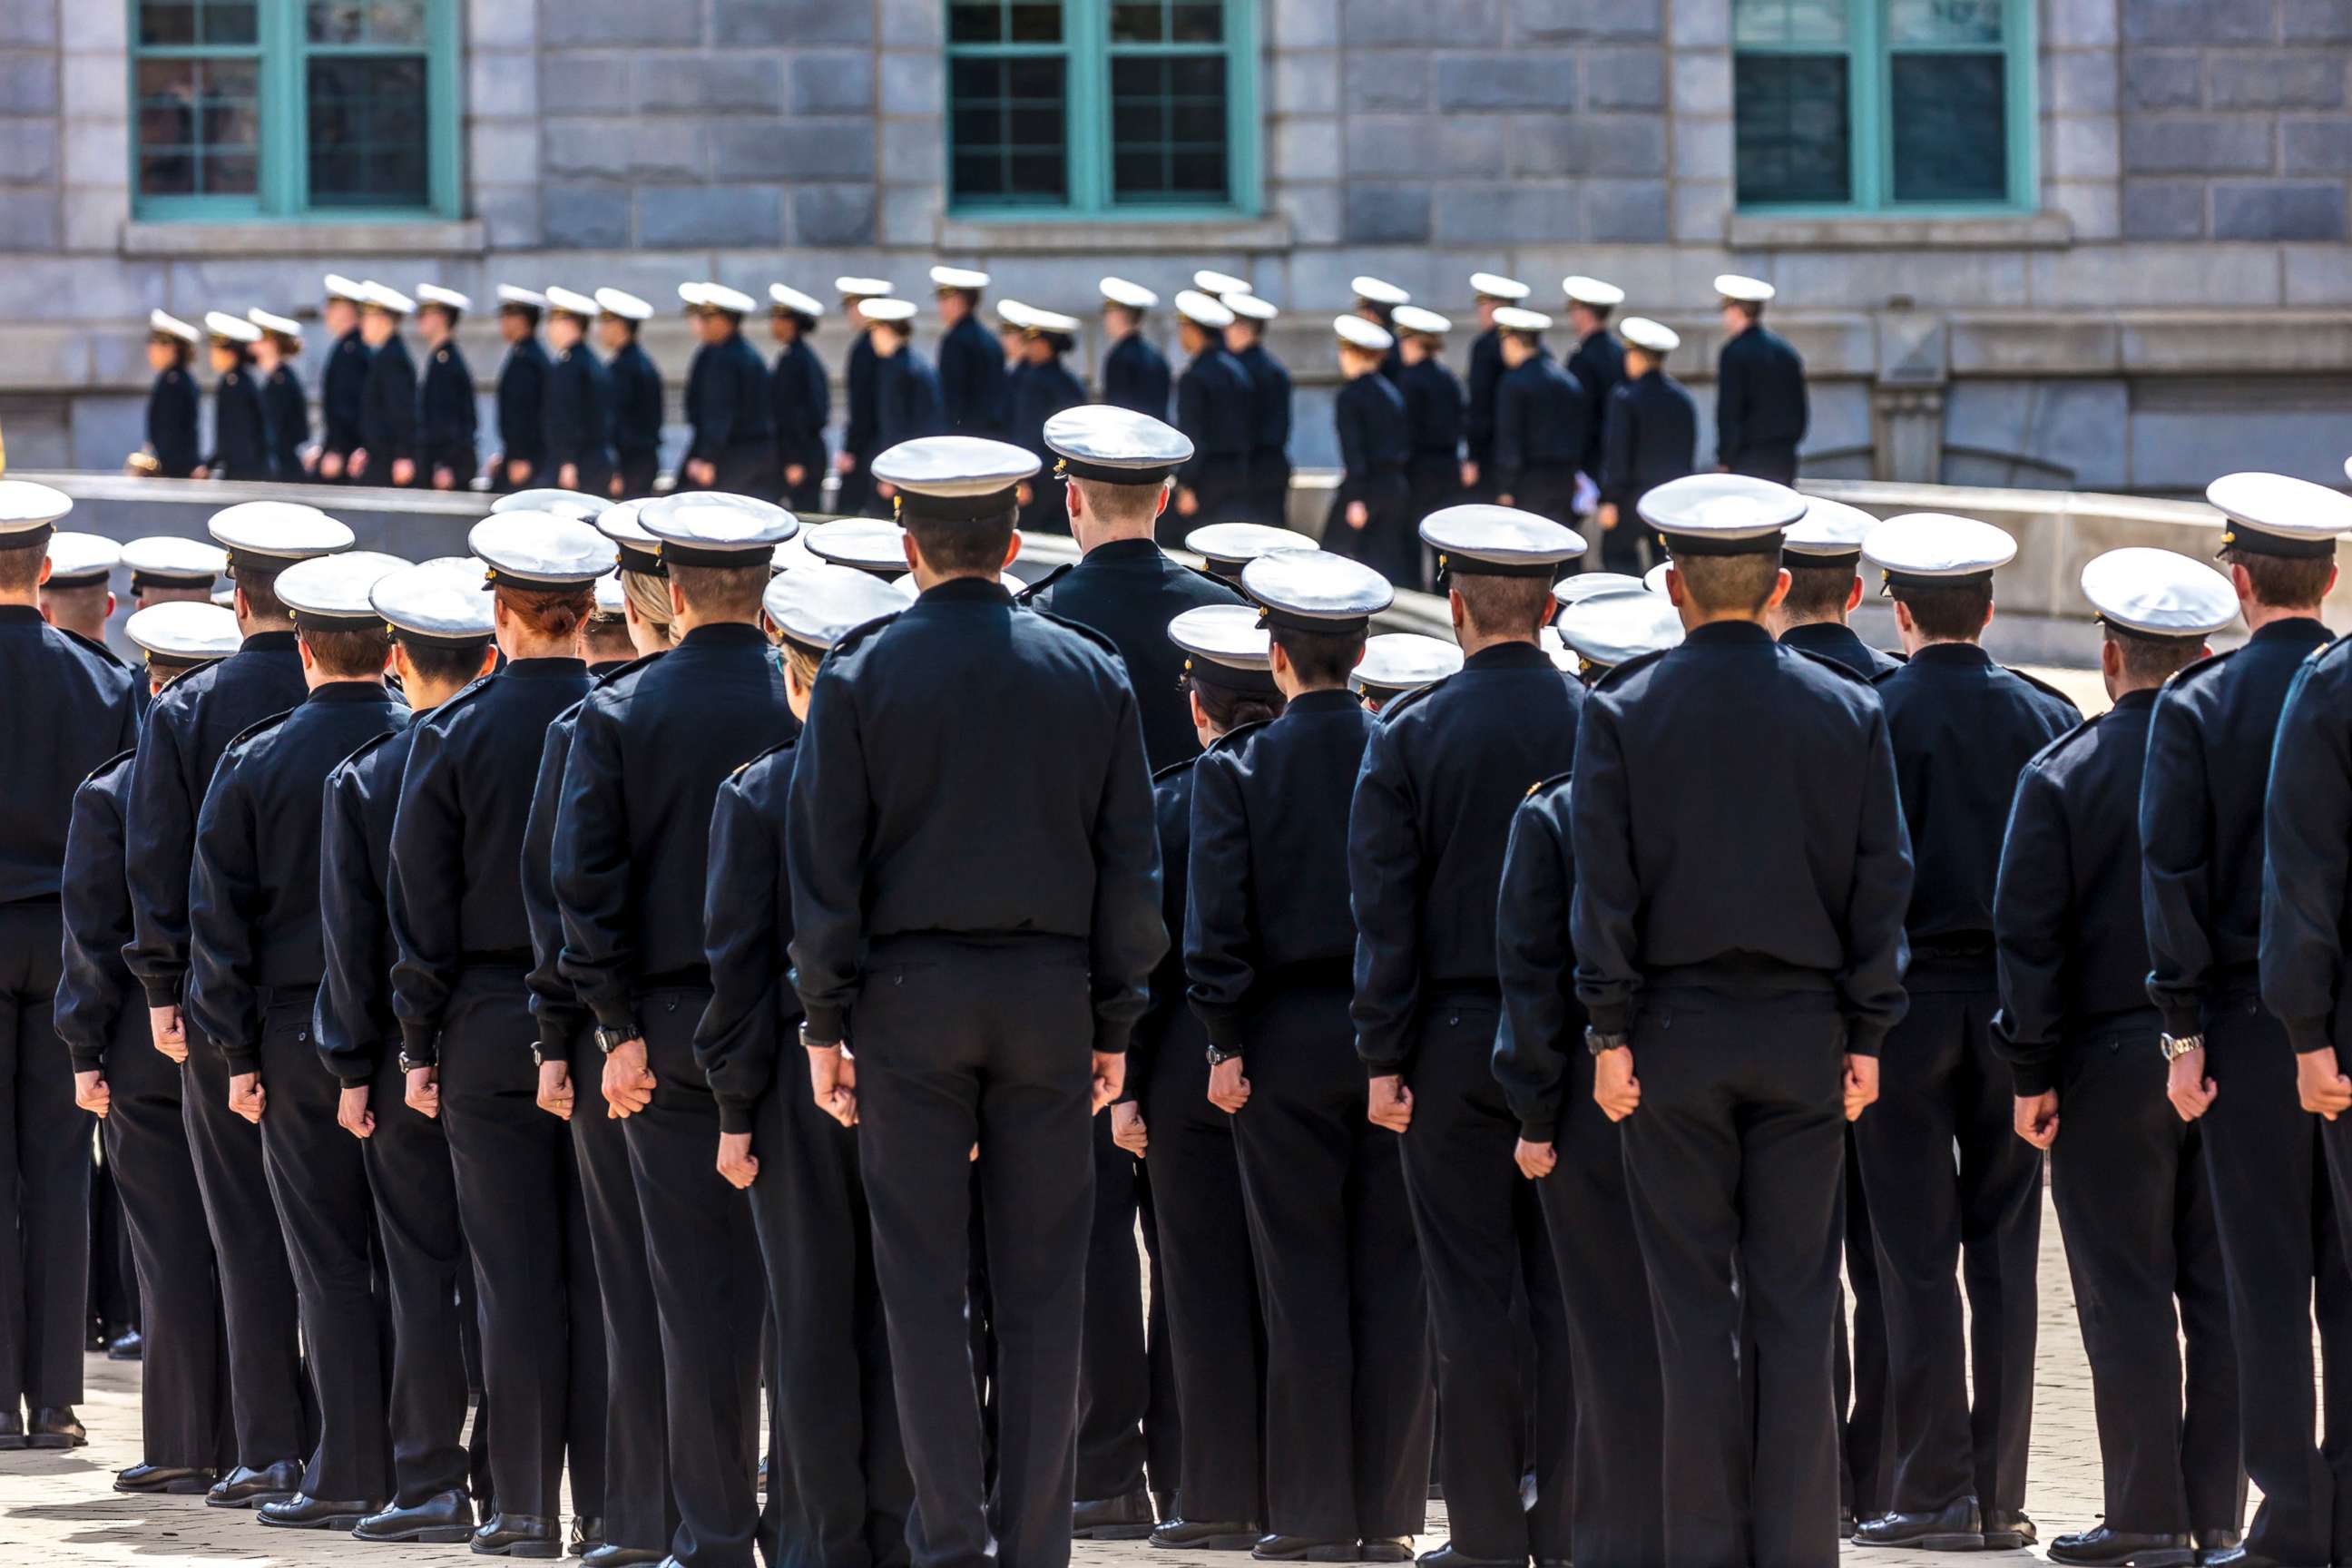 PHOTO: Midshipmen are seen in formation before lunchtime, US Naval Academy, Annapolis M.D.